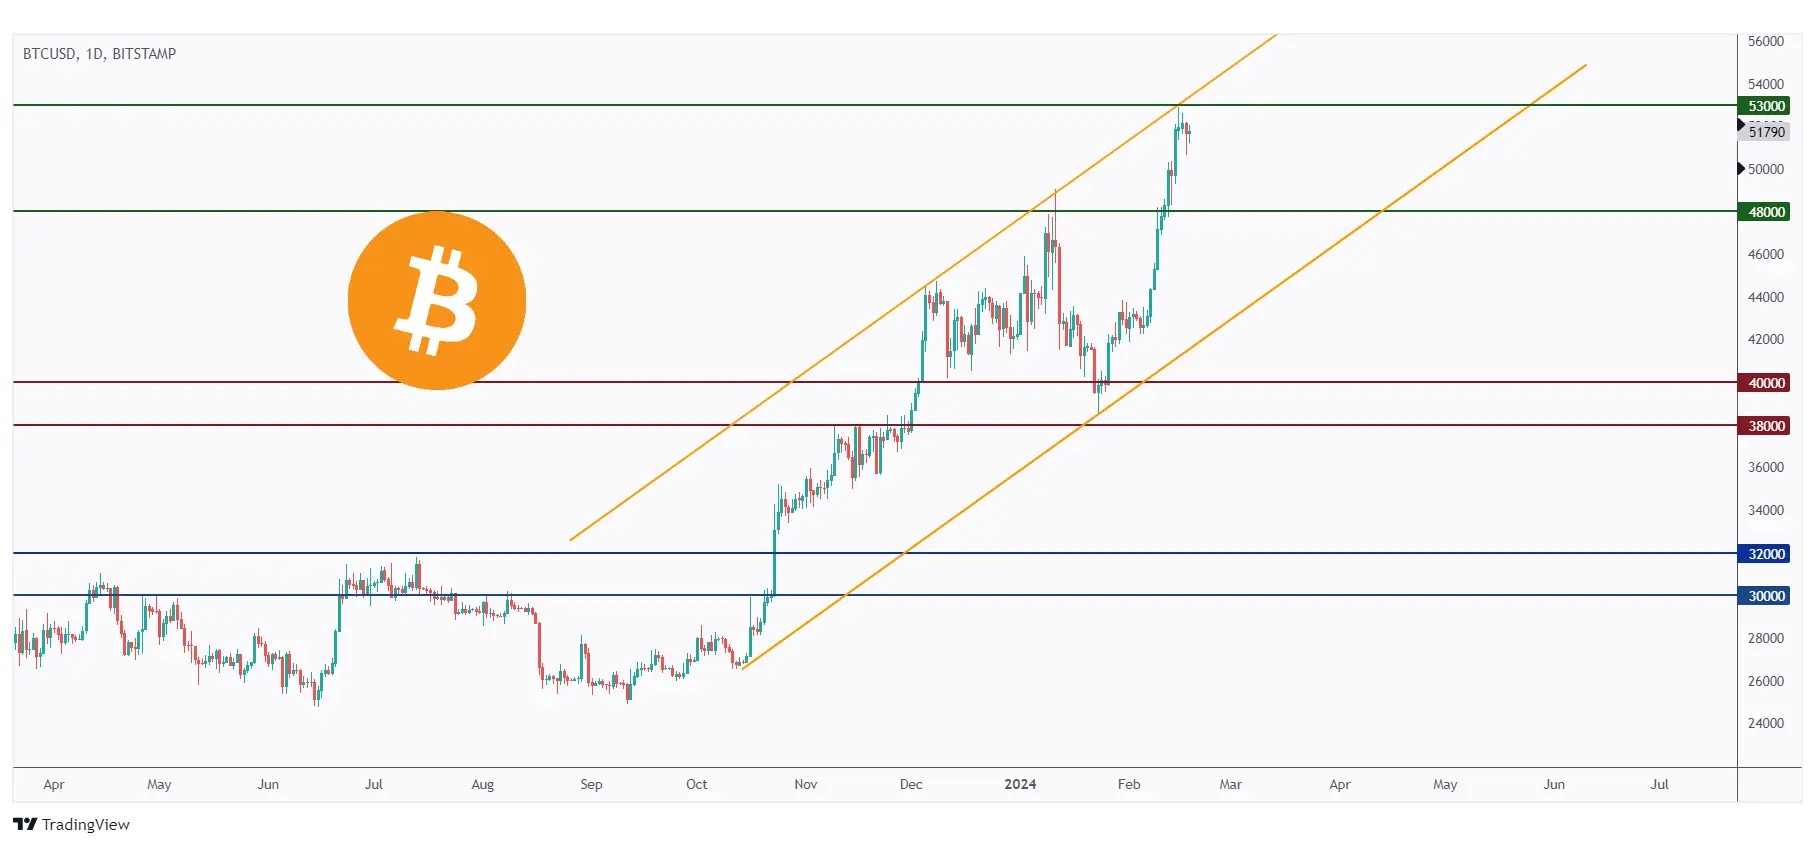 BTC daily chart overall bullish trading inside the rising channel.